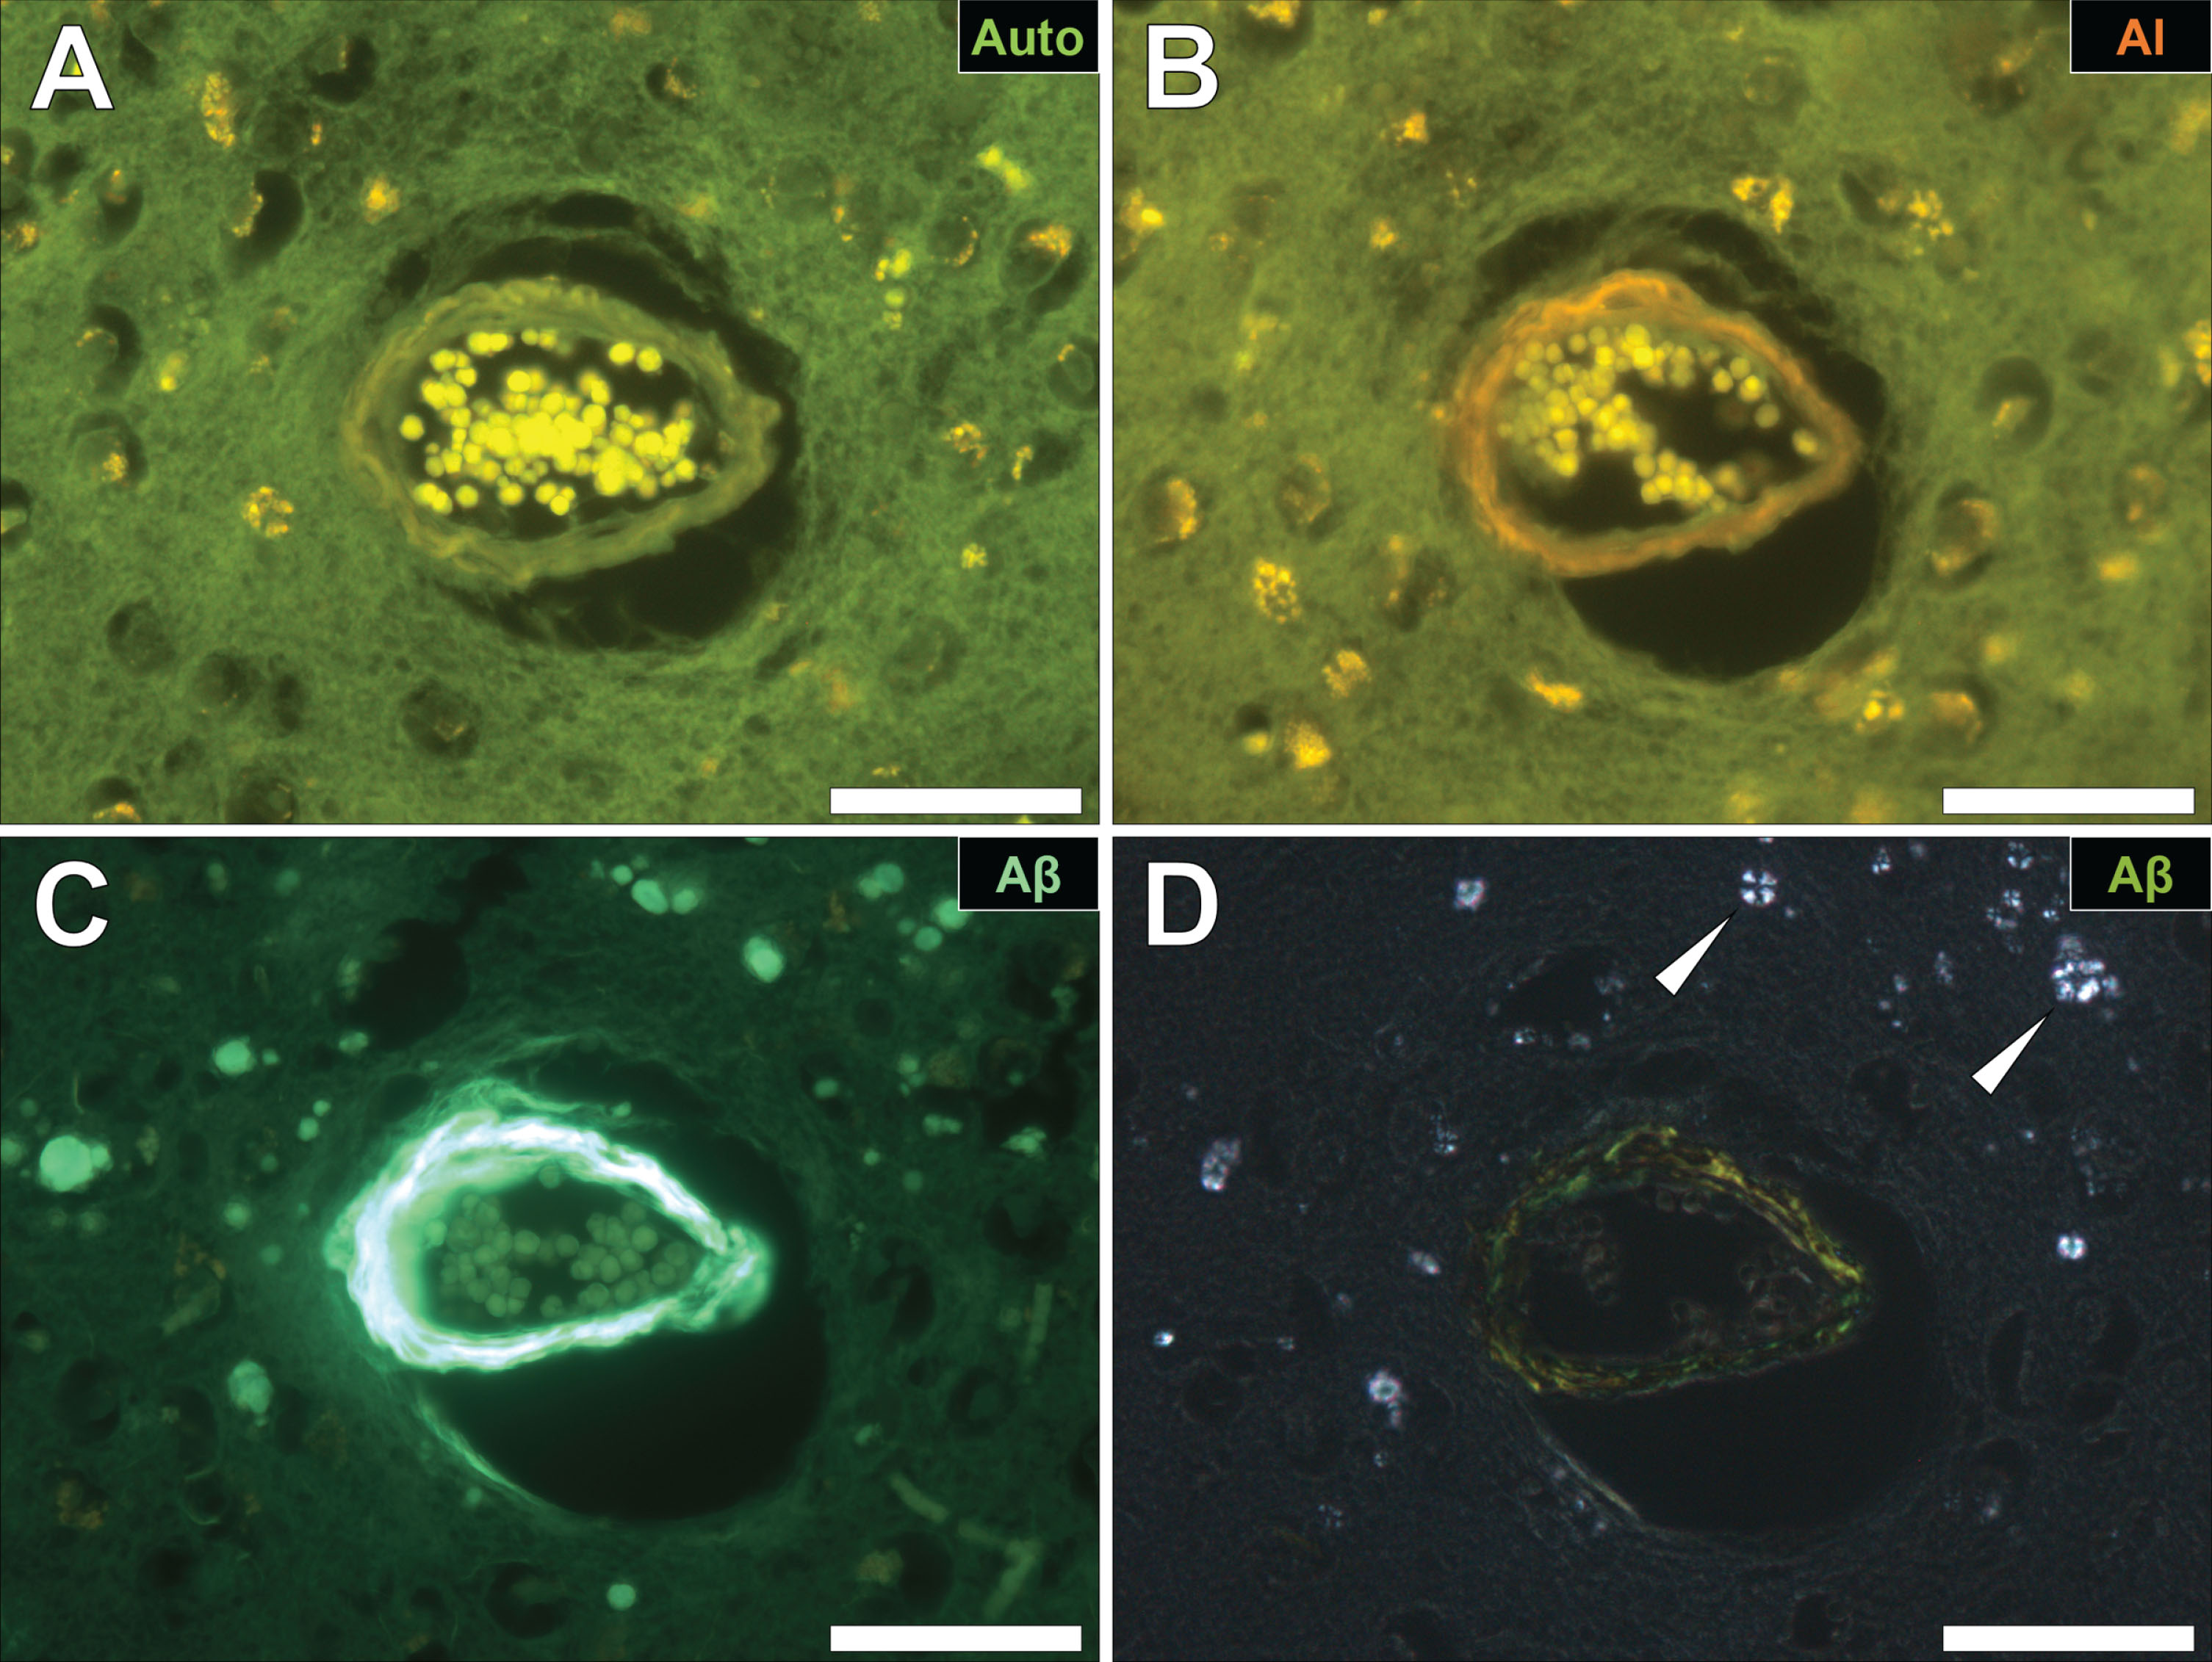 Cerebral amyloid angiopathy (CAA) in a blood vessel in the frontal cortex of a donor with fAD. A) Autofluorescence revealed a weak green fluorescence emission of the vessel wall. B) Lumogallion revealed the presence of aluminum (orange fluorescence) in the same vessel. C) Positive ThS-staining identifies amyloid-β in the vessel wall. D) Apple-green birefringence when stained with Congo red under polarized light is indicative of amyloid-β in a β sheet conformation. White arrows highlight mineralized deposits appearing as spherulites, producing a Maltese-Cross diffraction pattern. Magnification: X 400, scale bars = 50 μm.